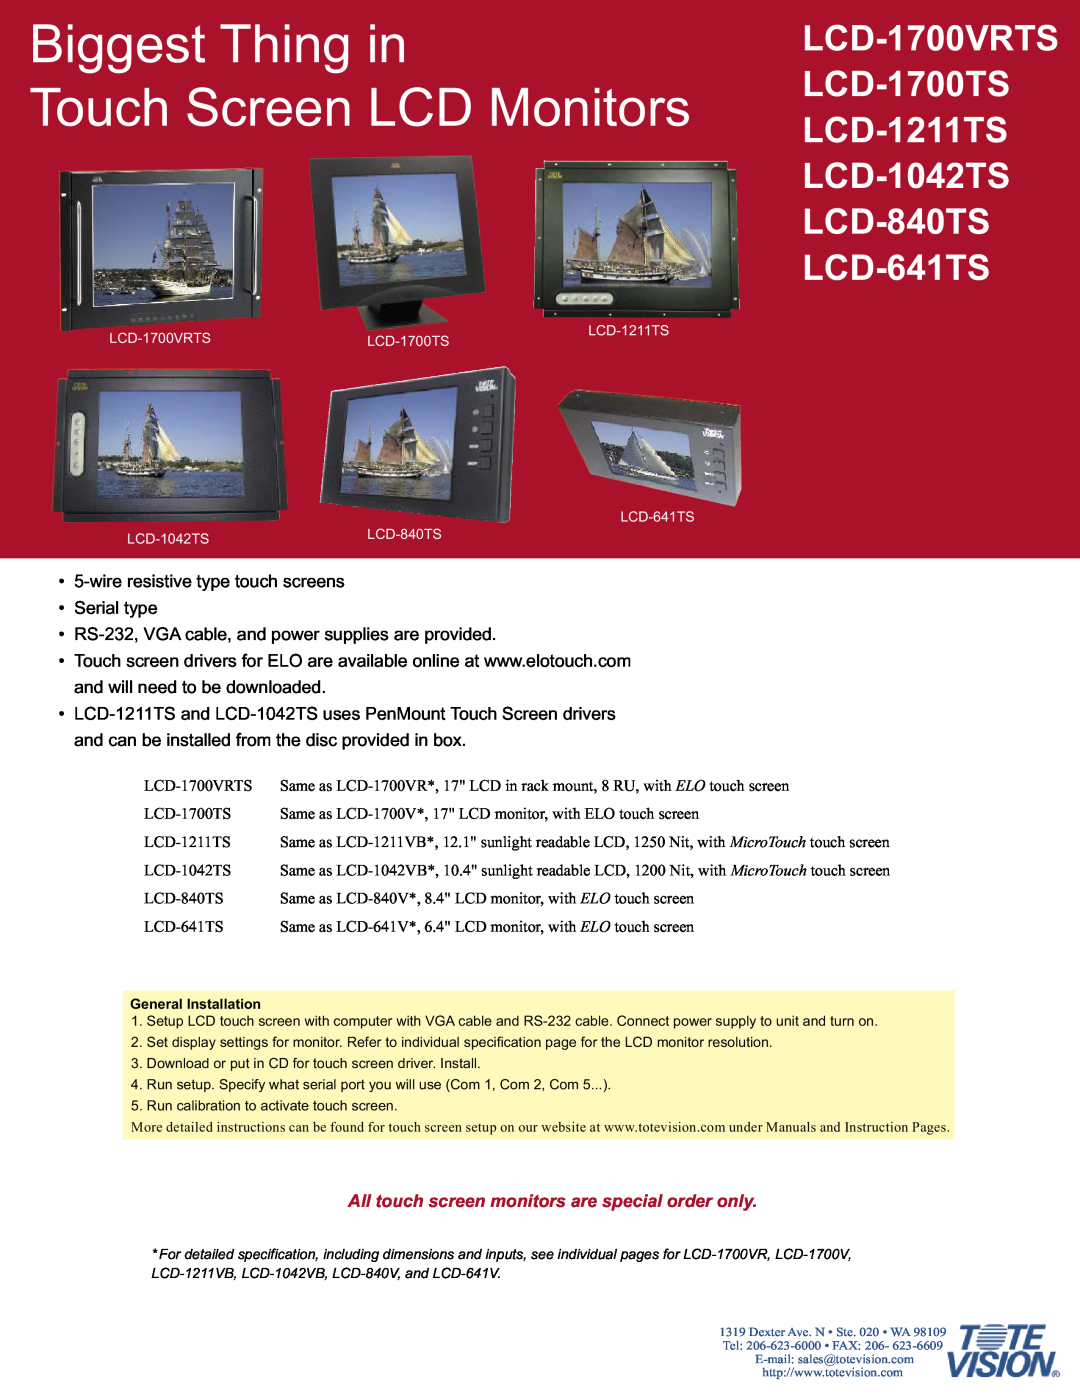 Tote Vision LCD-1700TS, LCD-1700VRTS, LCD-840TS, LCD-641TS dimensions Biggest Thing in Touch Screen LCD Monitors 